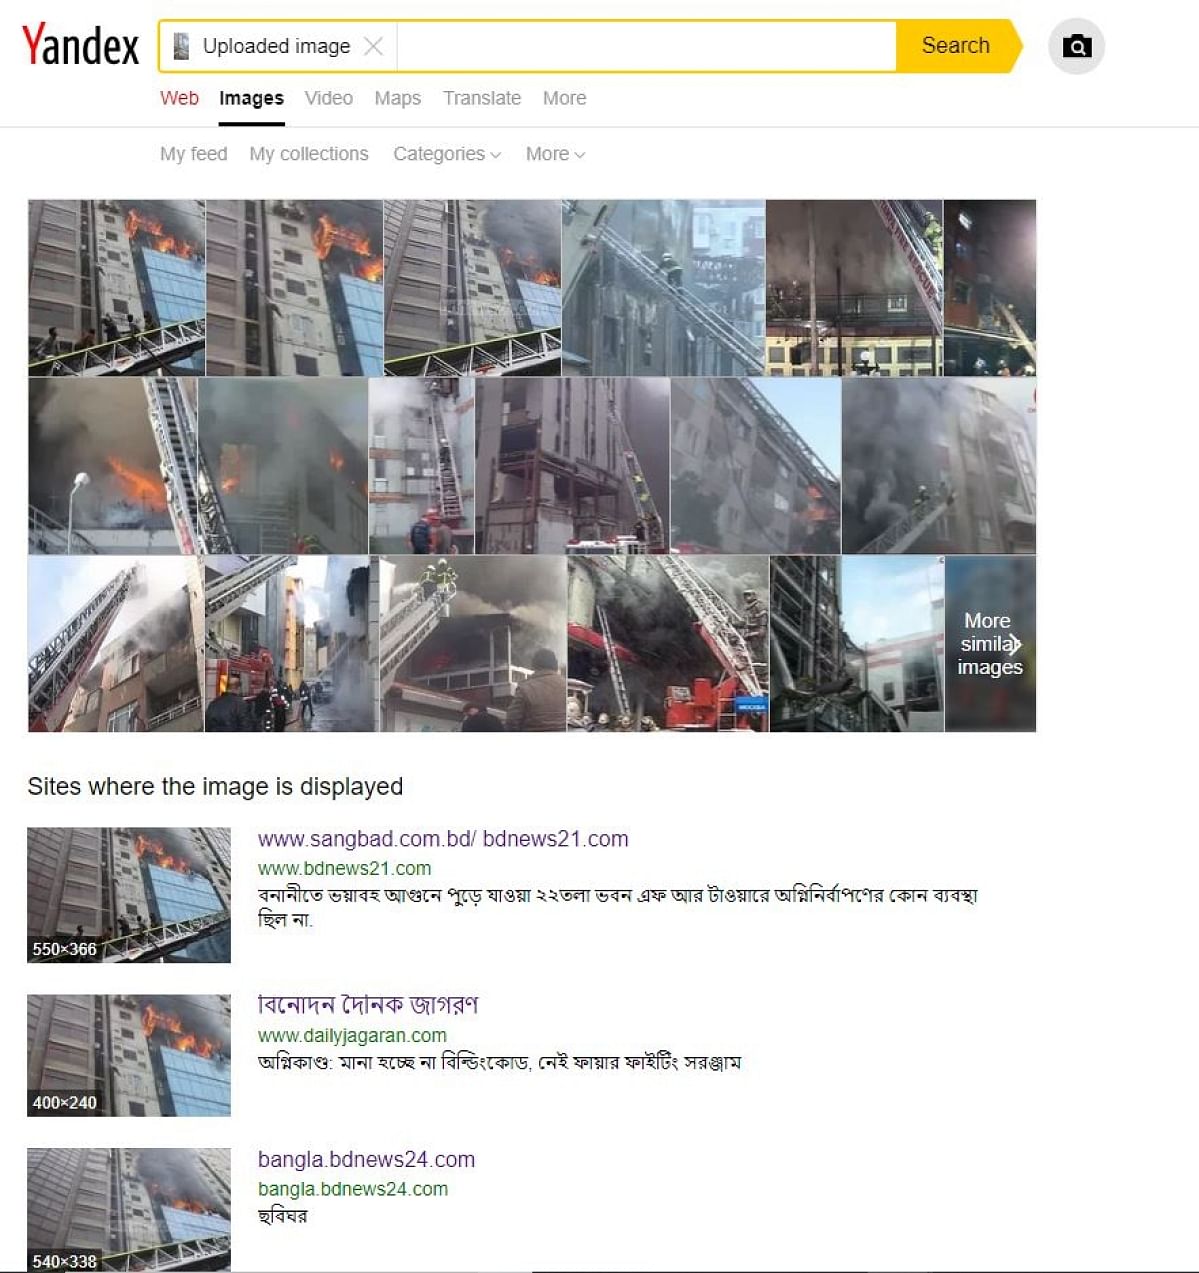 The video is not of the Kolkata blaze, but is actually from another fire accident in Bangladesh’s Dhaka.